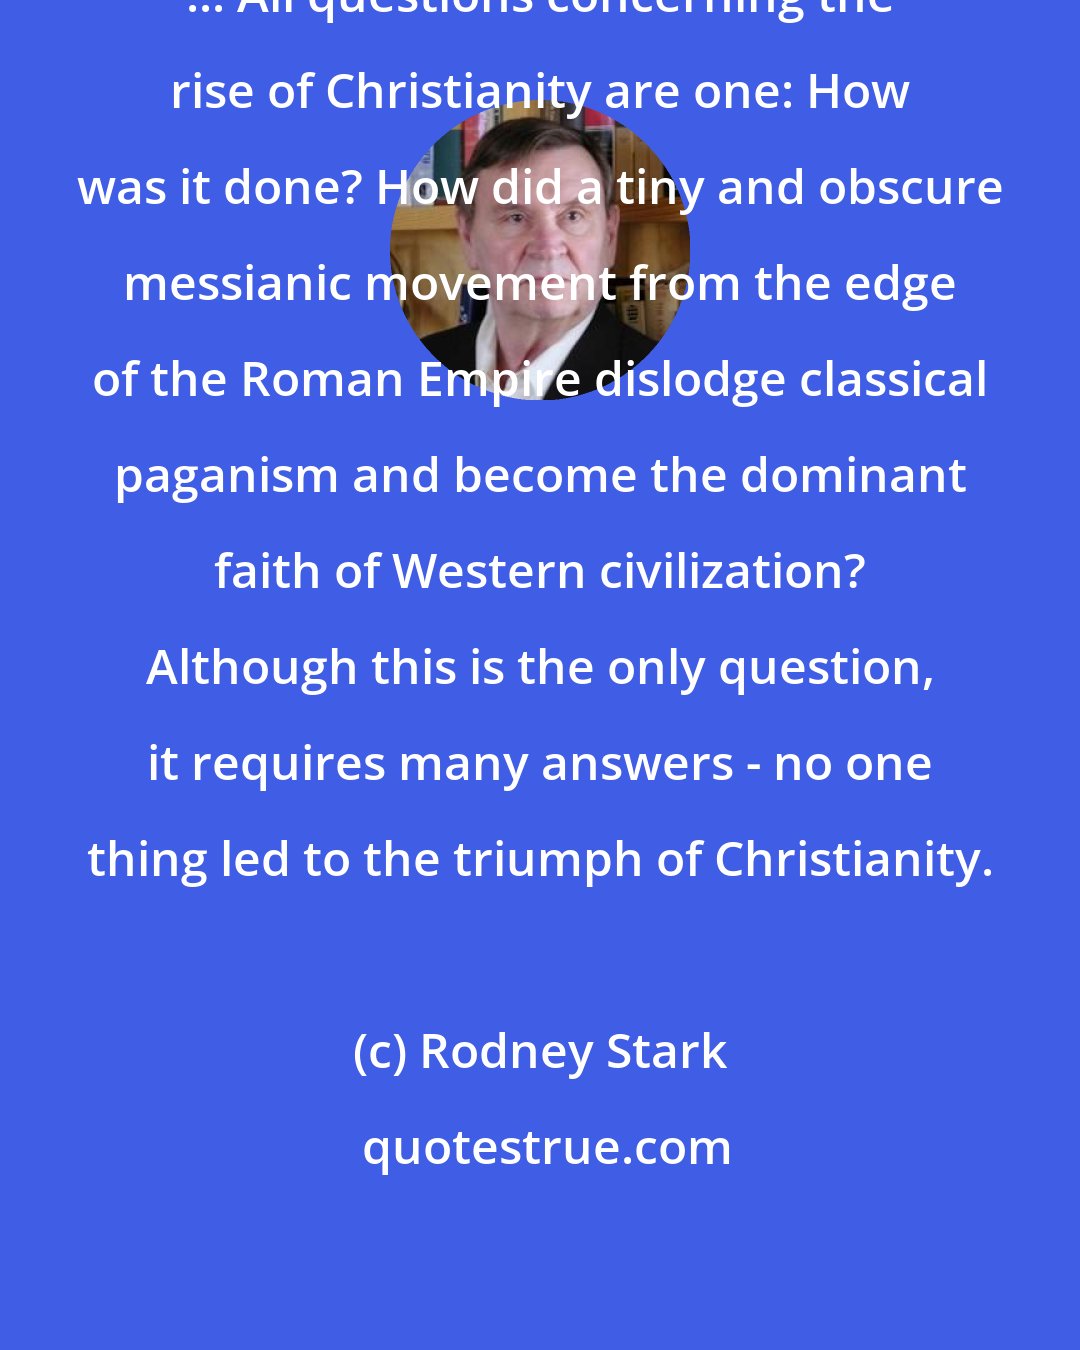 Rodney Stark: ... All questions concerning the rise of Christianity are one: How was it done? How did a tiny and obscure messianic movement from the edge of the Roman Empire dislodge classical paganism and become the dominant faith of Western civilization? Although this is the only question, it requires many answers - no one thing led to the triumph of Christianity.